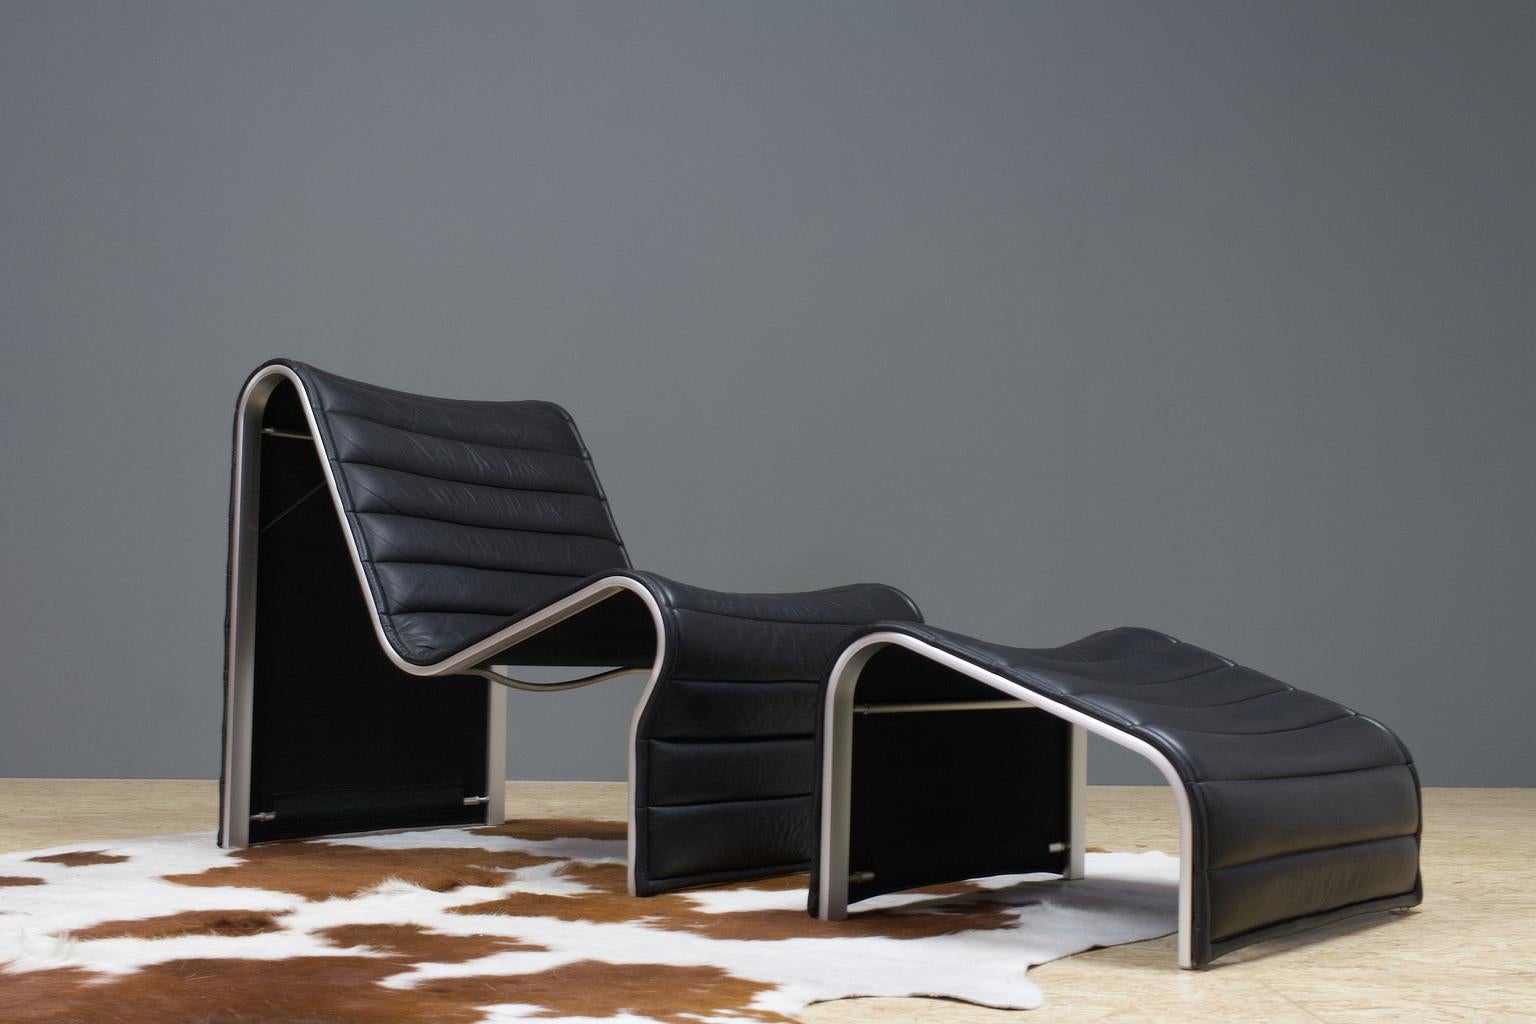 Vintage Swedish 1970s Brutalist leather lounge chair with ottoman, designed by Eric Sigfrid Persson and produced by Möbelkultur AB. The set is executed in a soft, high quality black leather and aluminium frame. The set is in very good condition with